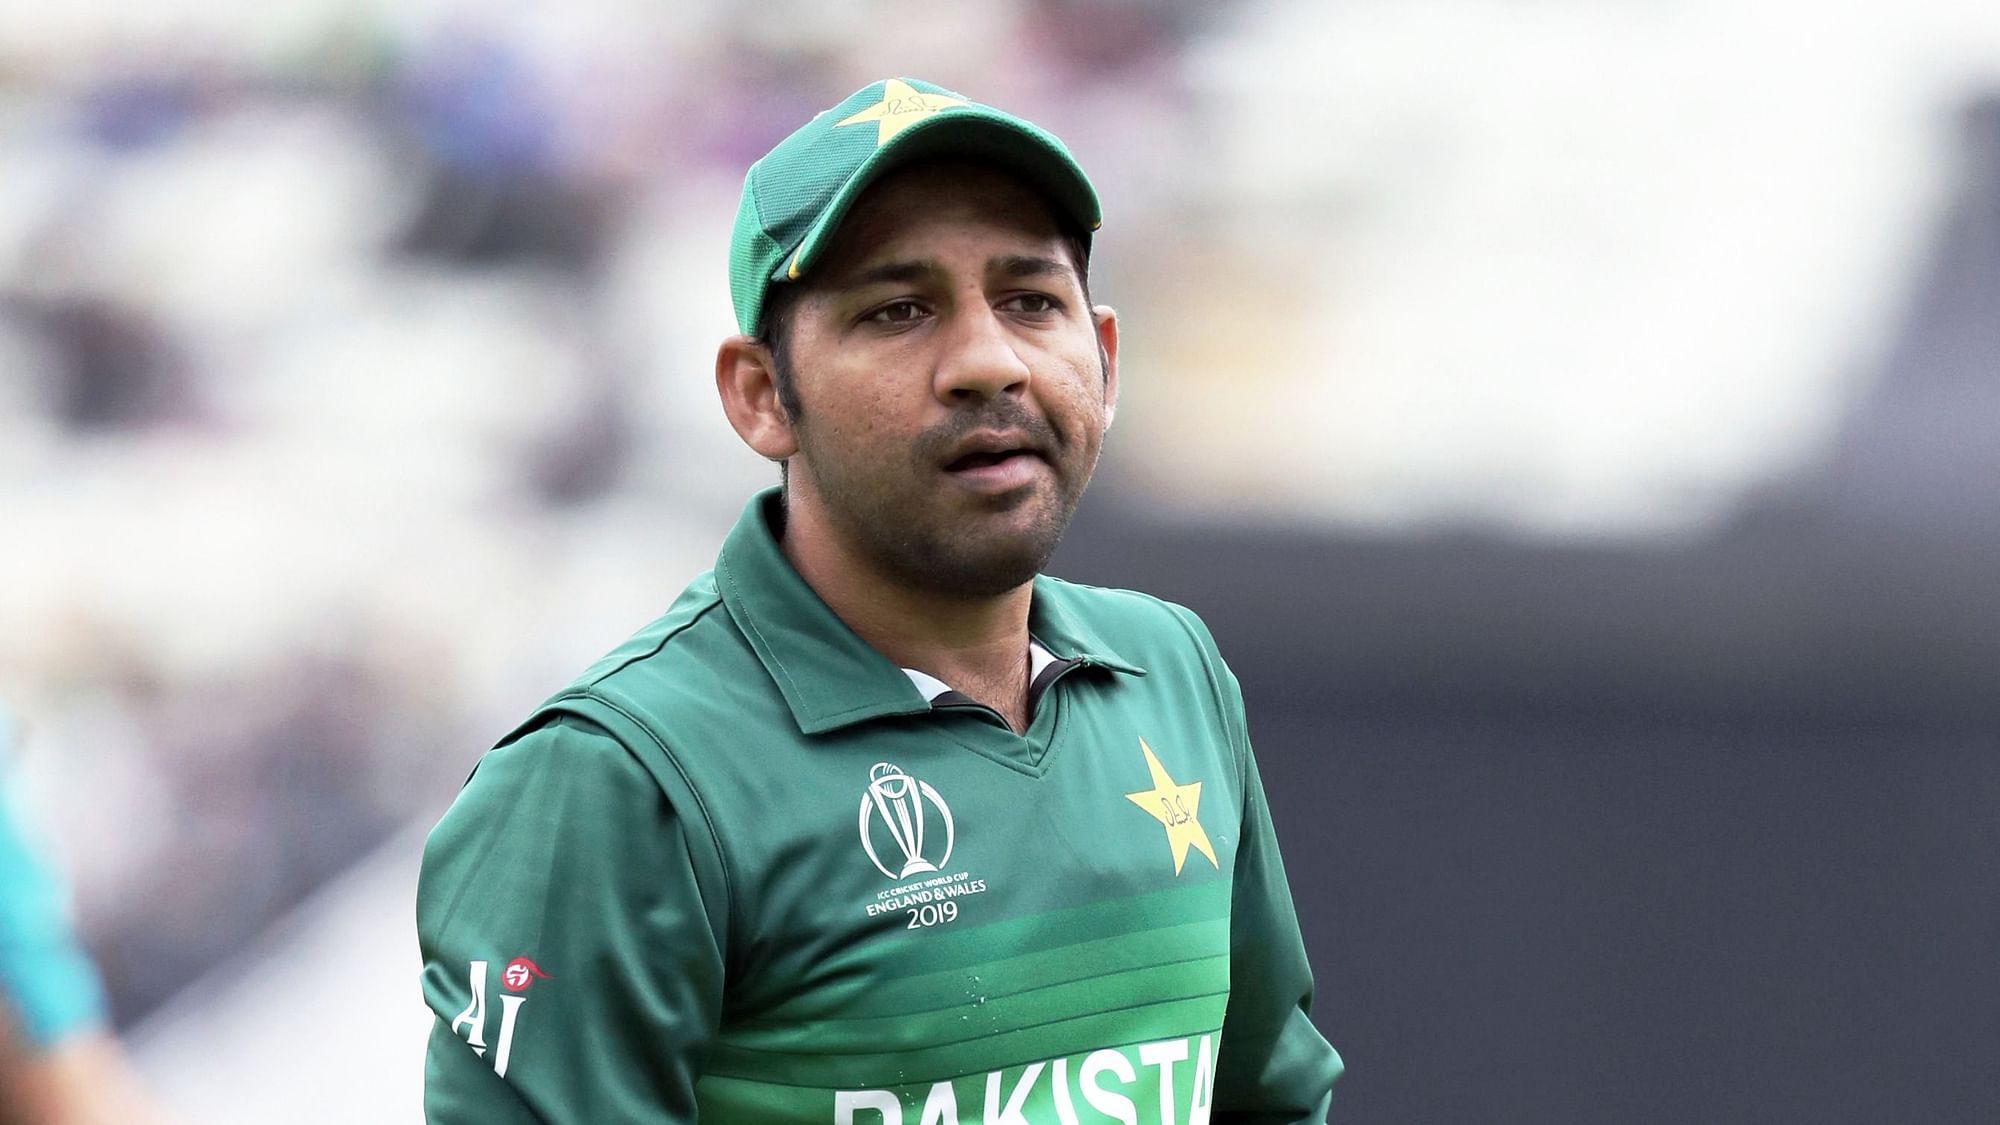 Sarfaraz Ahmed has been fined for a code of conduct breach by the Pakistan Cricket Board (PCB).